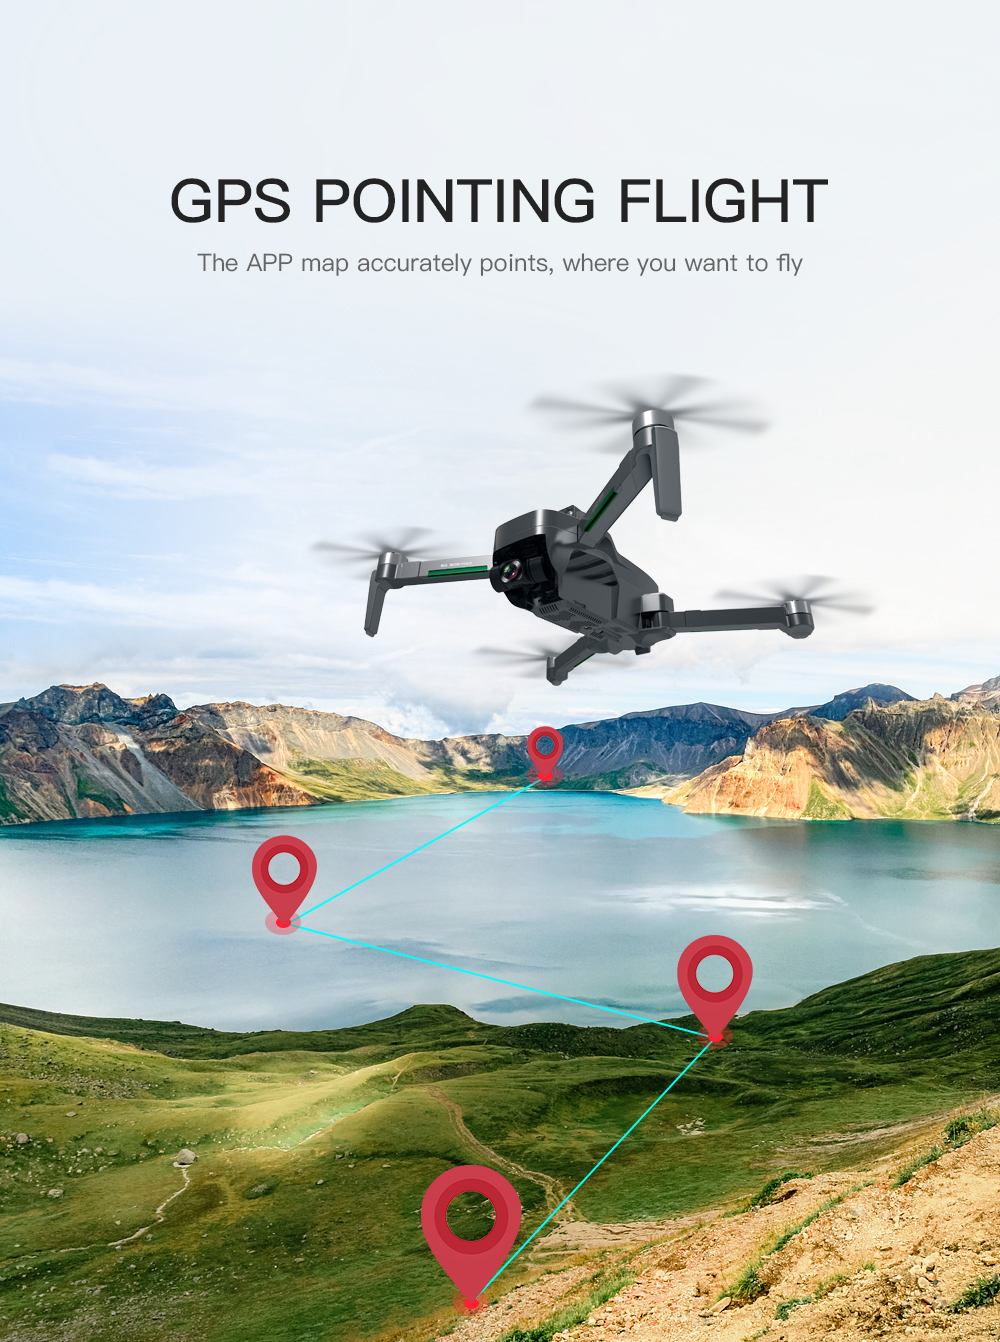 ZLRC SG906 PRO 3 MAX GPS 5G WIFI FPV With 4K HD Camera 3-Axis EIS Anti-shake Gimbal Obstacle Avoidance Brushless Foldable RC Drone Quadcopter RTF